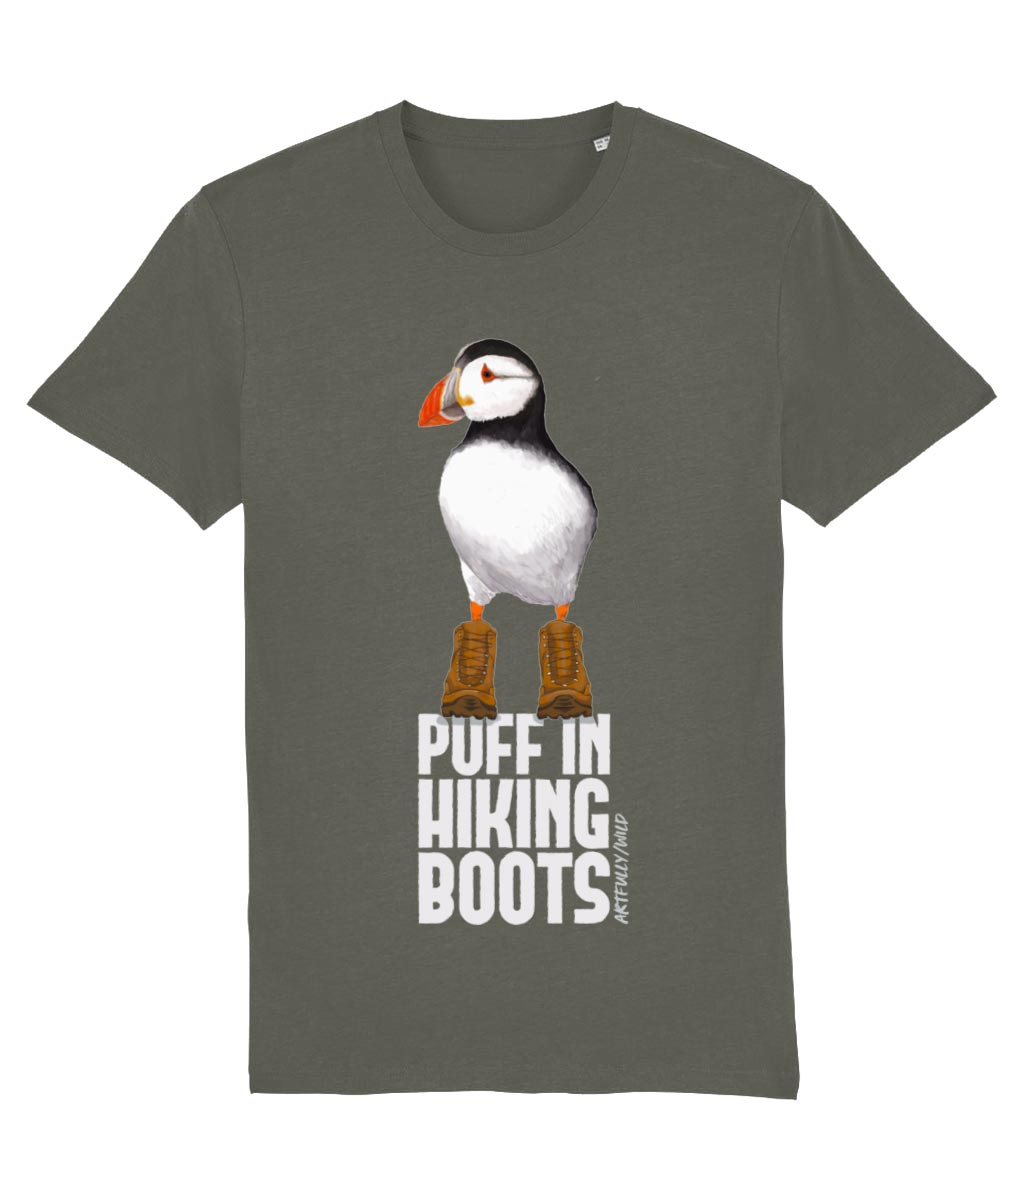 'PUFF IN HIKING BOOTS' Print on Khaki Organic T-Shirt. Unisex/Women/Men. Sustainable. Original Painted Illustration by Artfully/Wild. Printed in the UK with water-based inks.